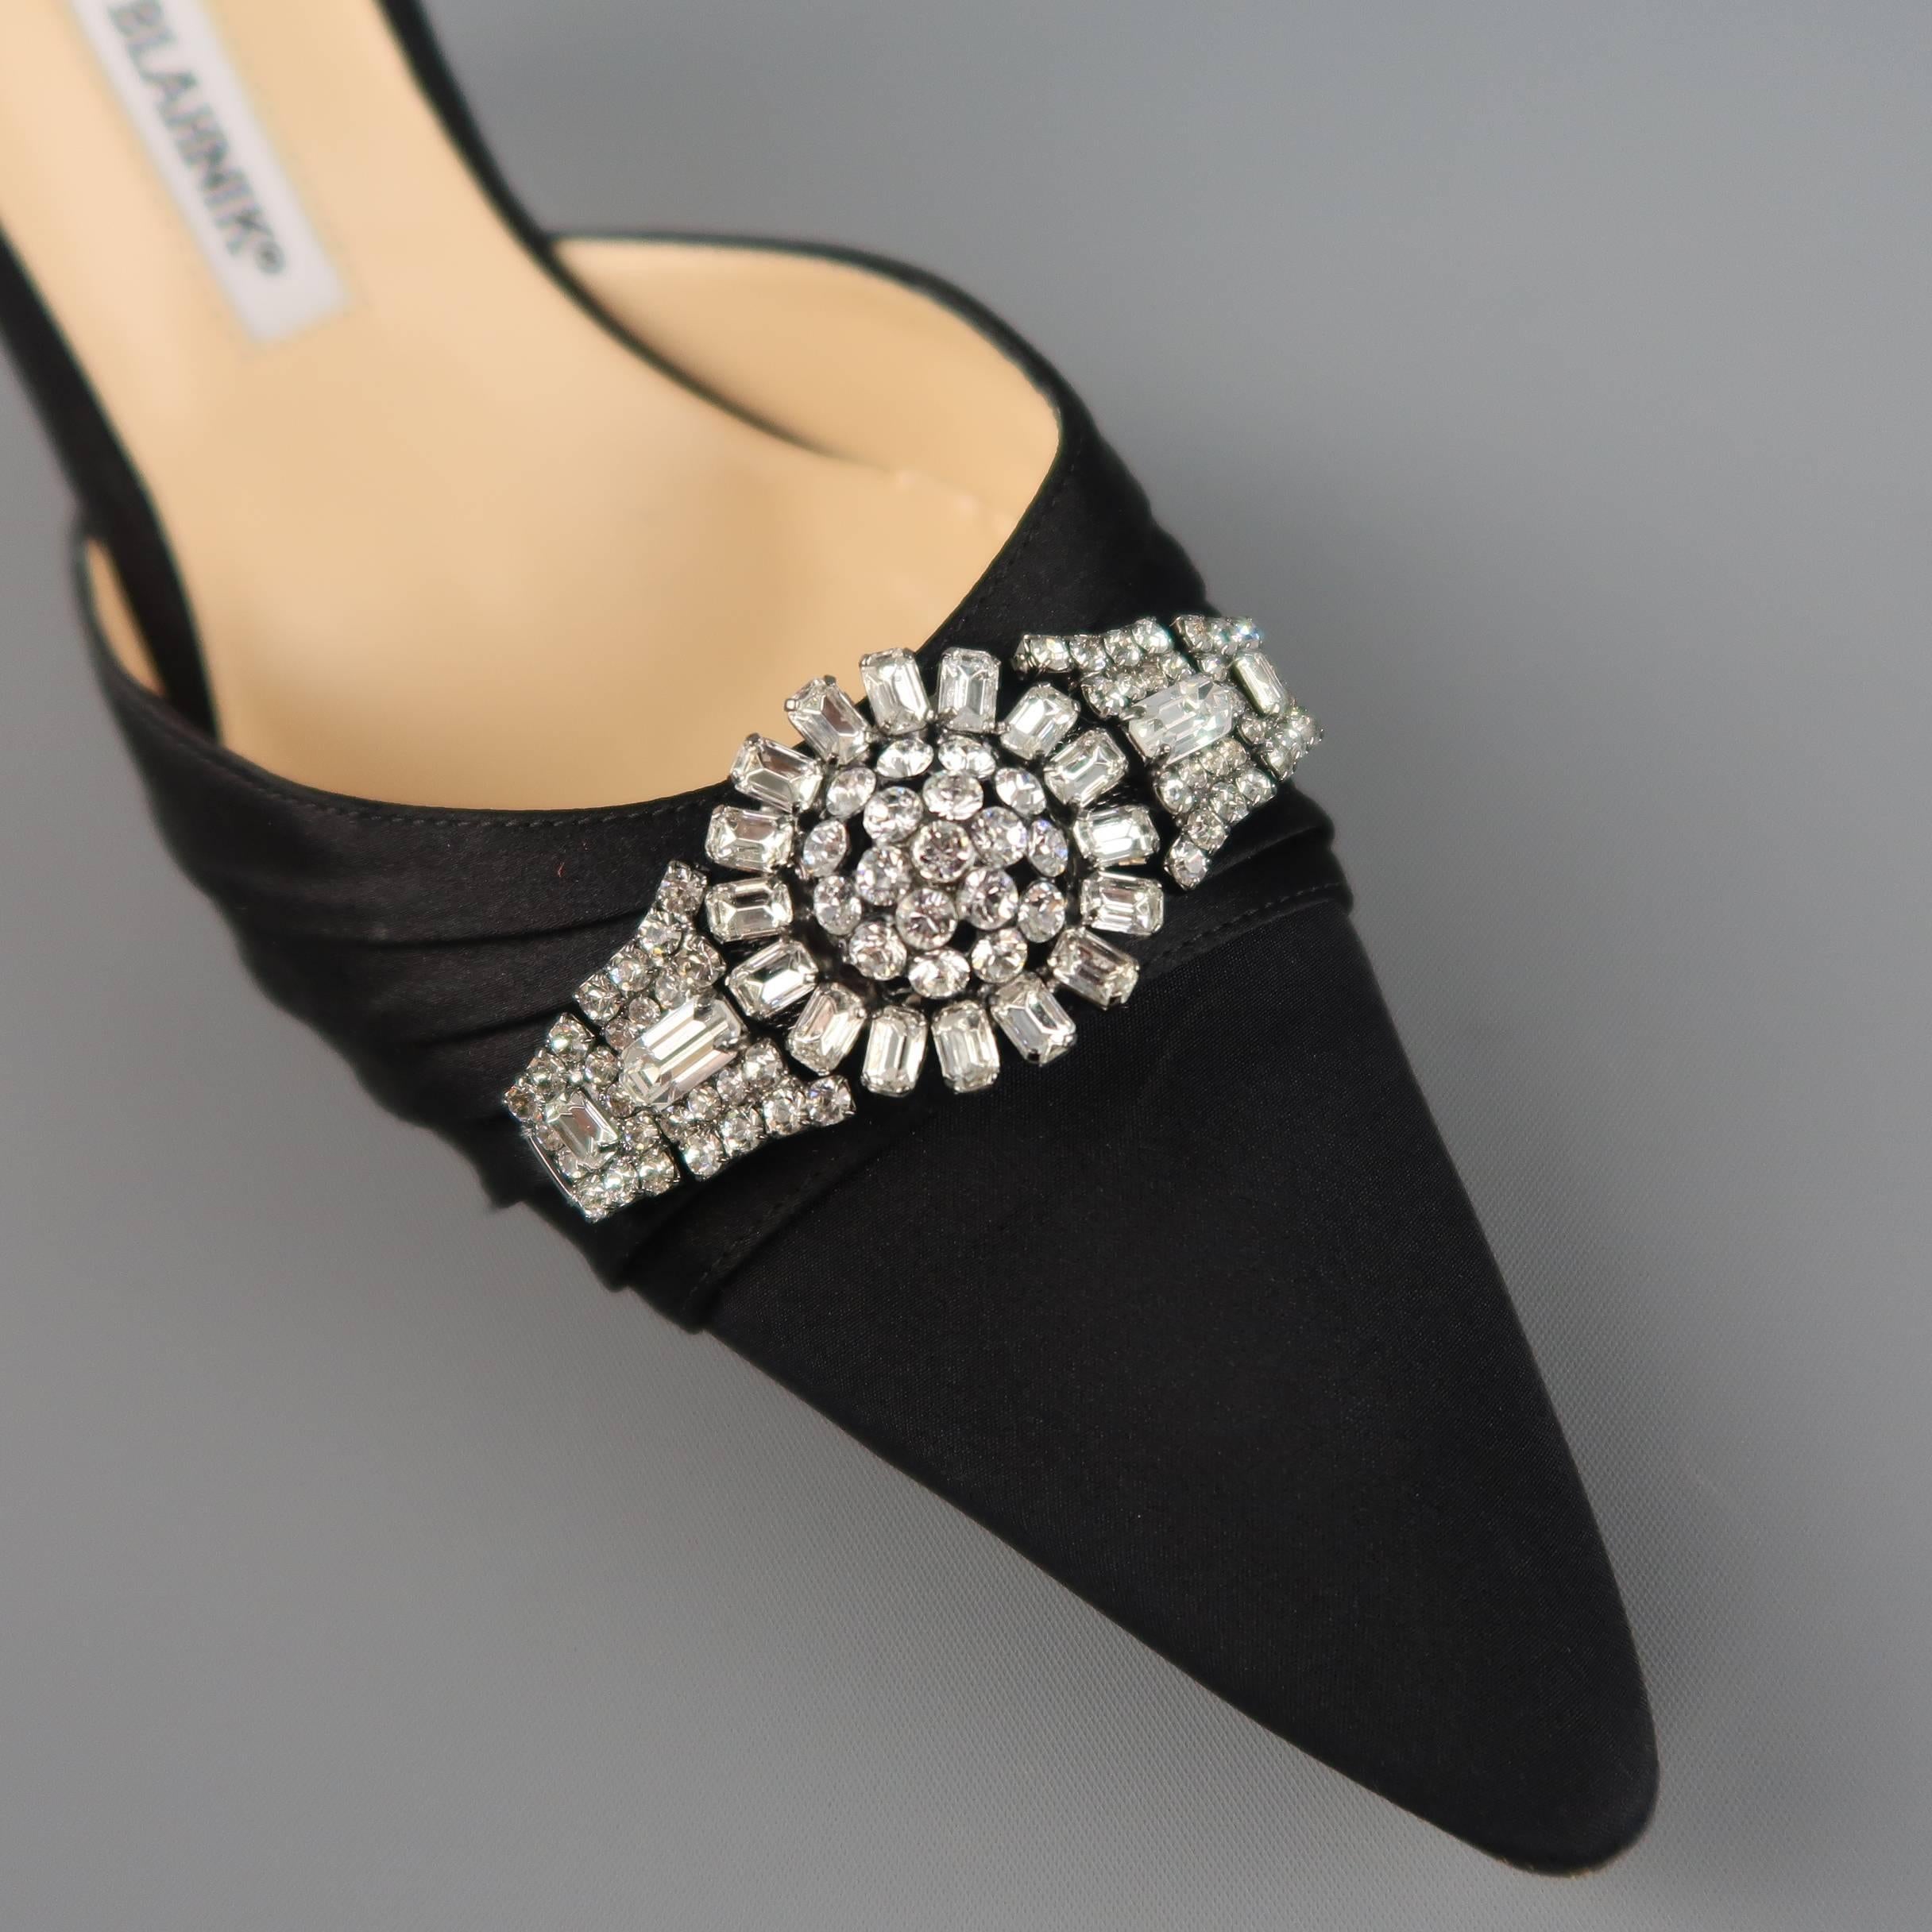 These fabulous MANOLO BLAHNIK evening pumps come in black silk covered leather and feature a D'orsay cut, covered stiletto heel, and pointed toe with pleated satin and rhinestone adornment. Made in Italy.
 
New with Tag.
Marked: IT 40.5
 
Heel: 3